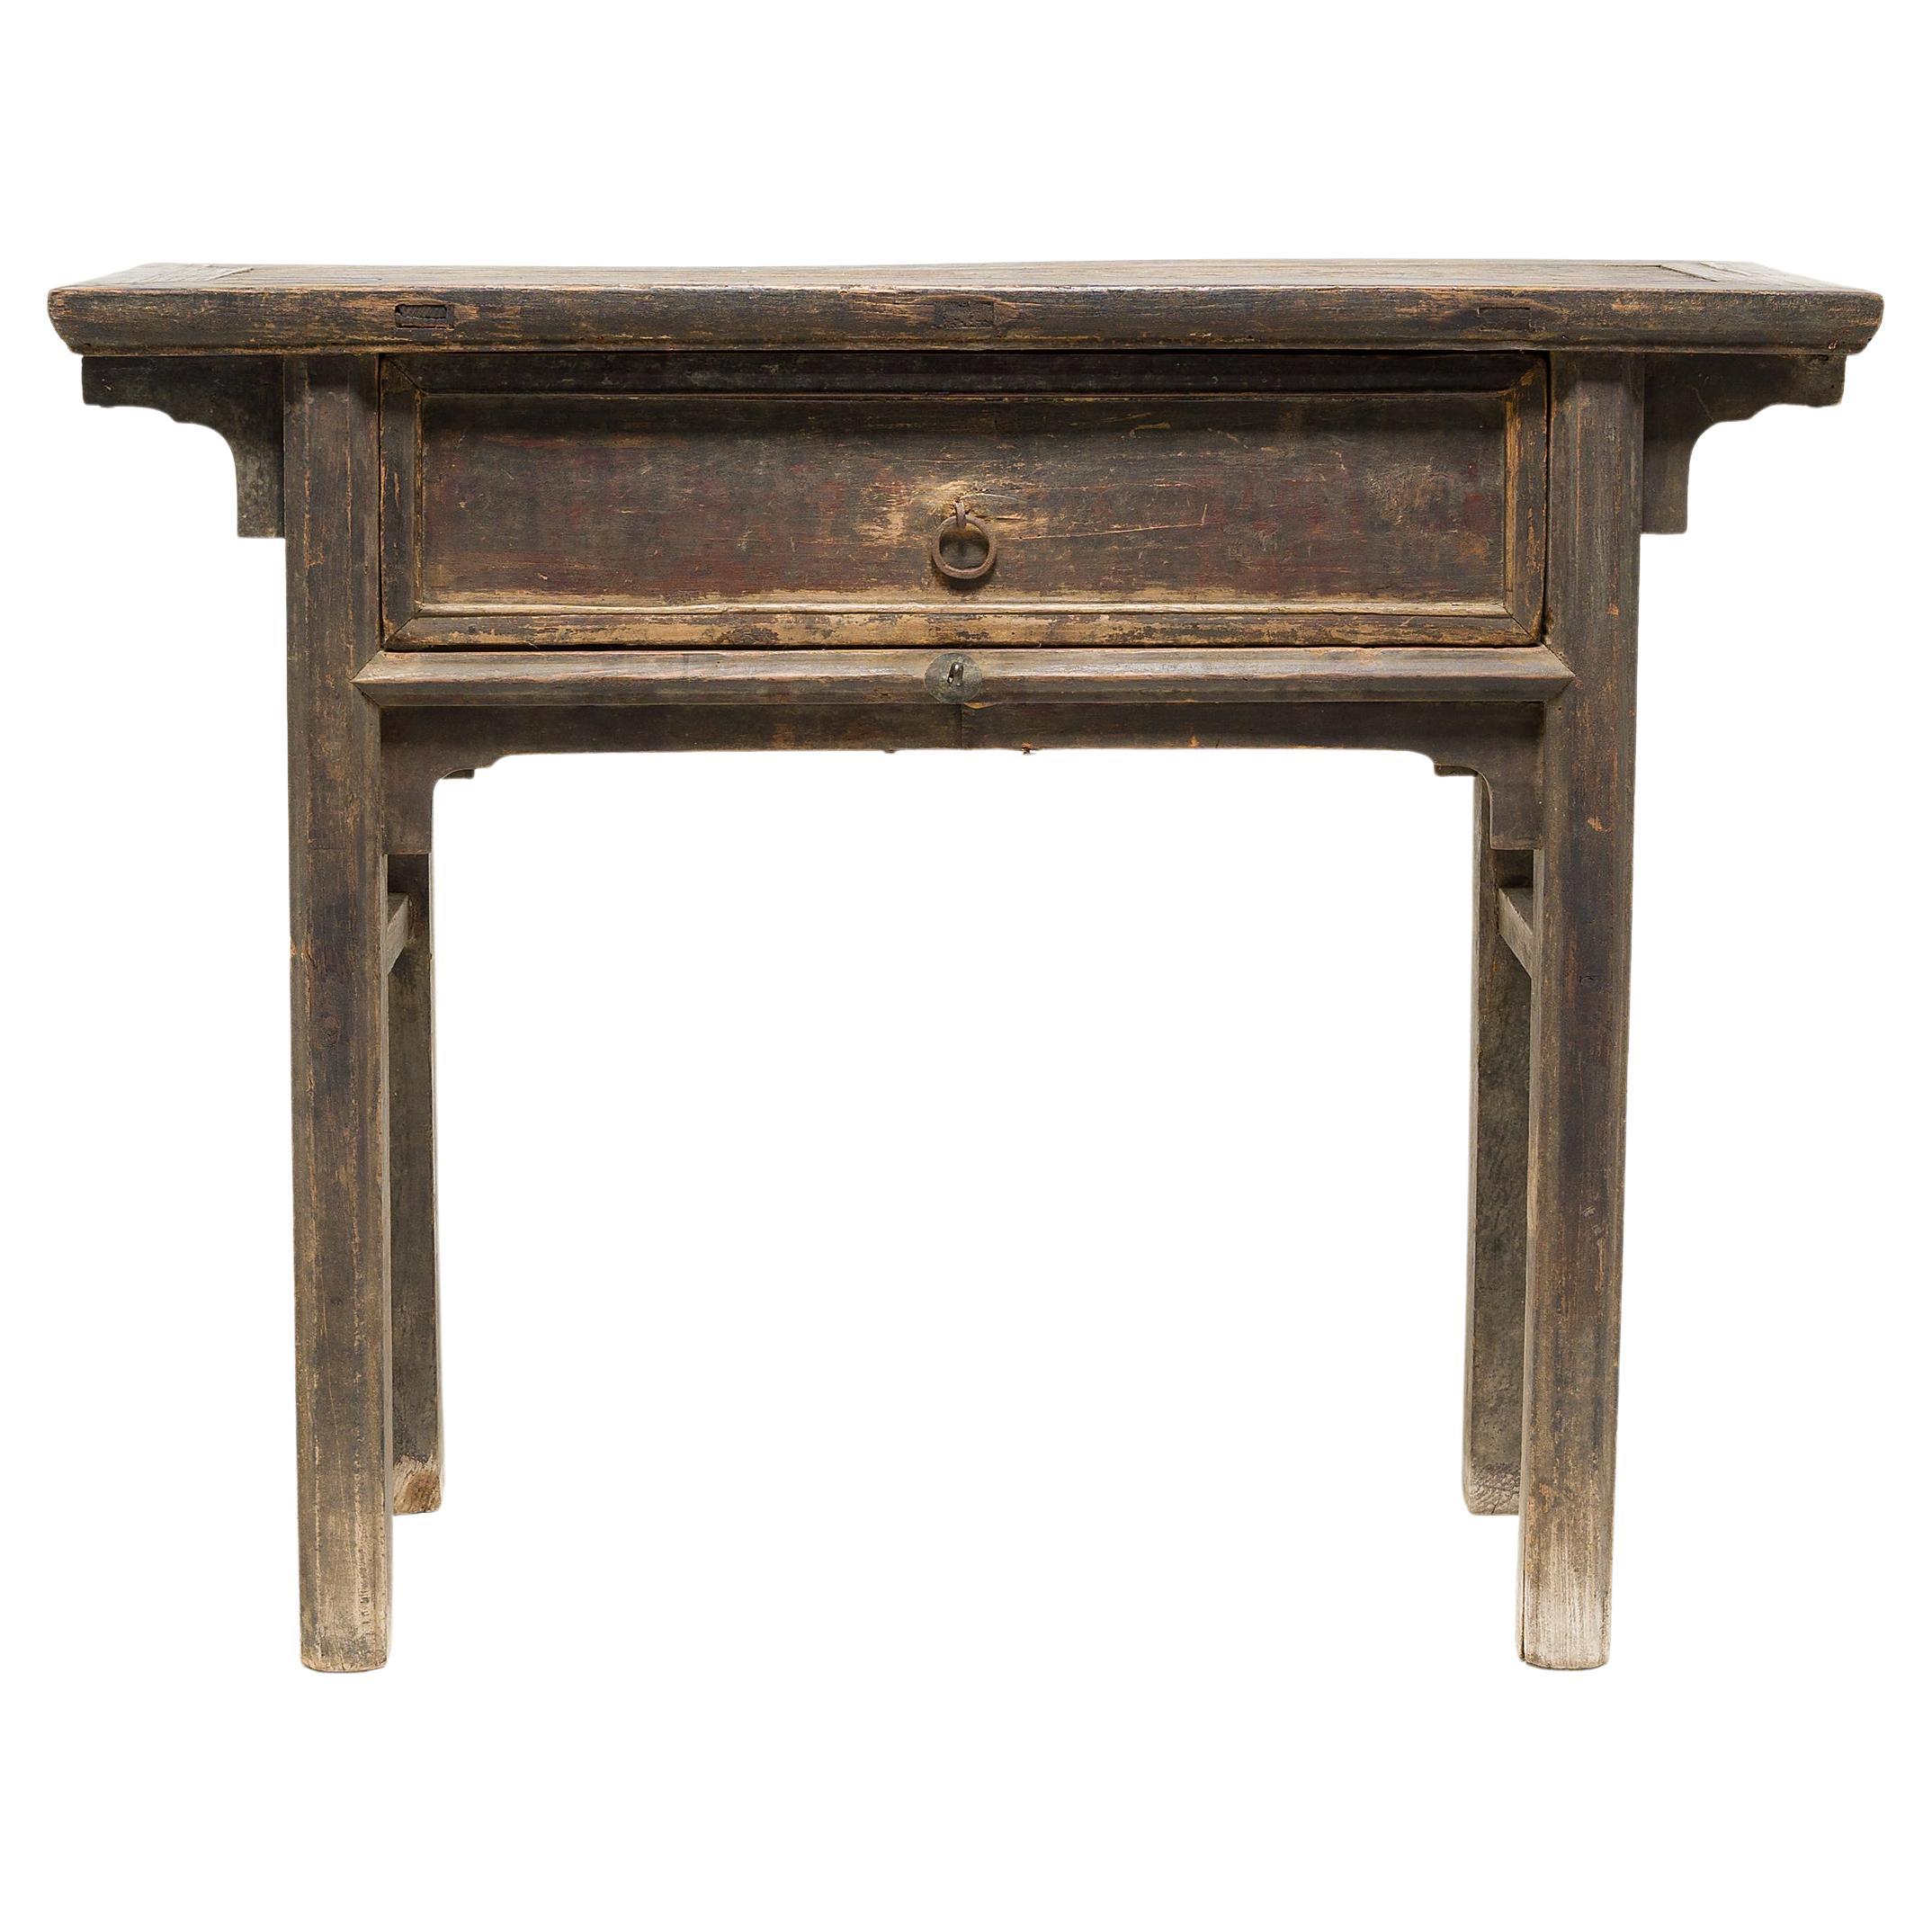 Table d'offrande chinoise peu profonde, vers 1800